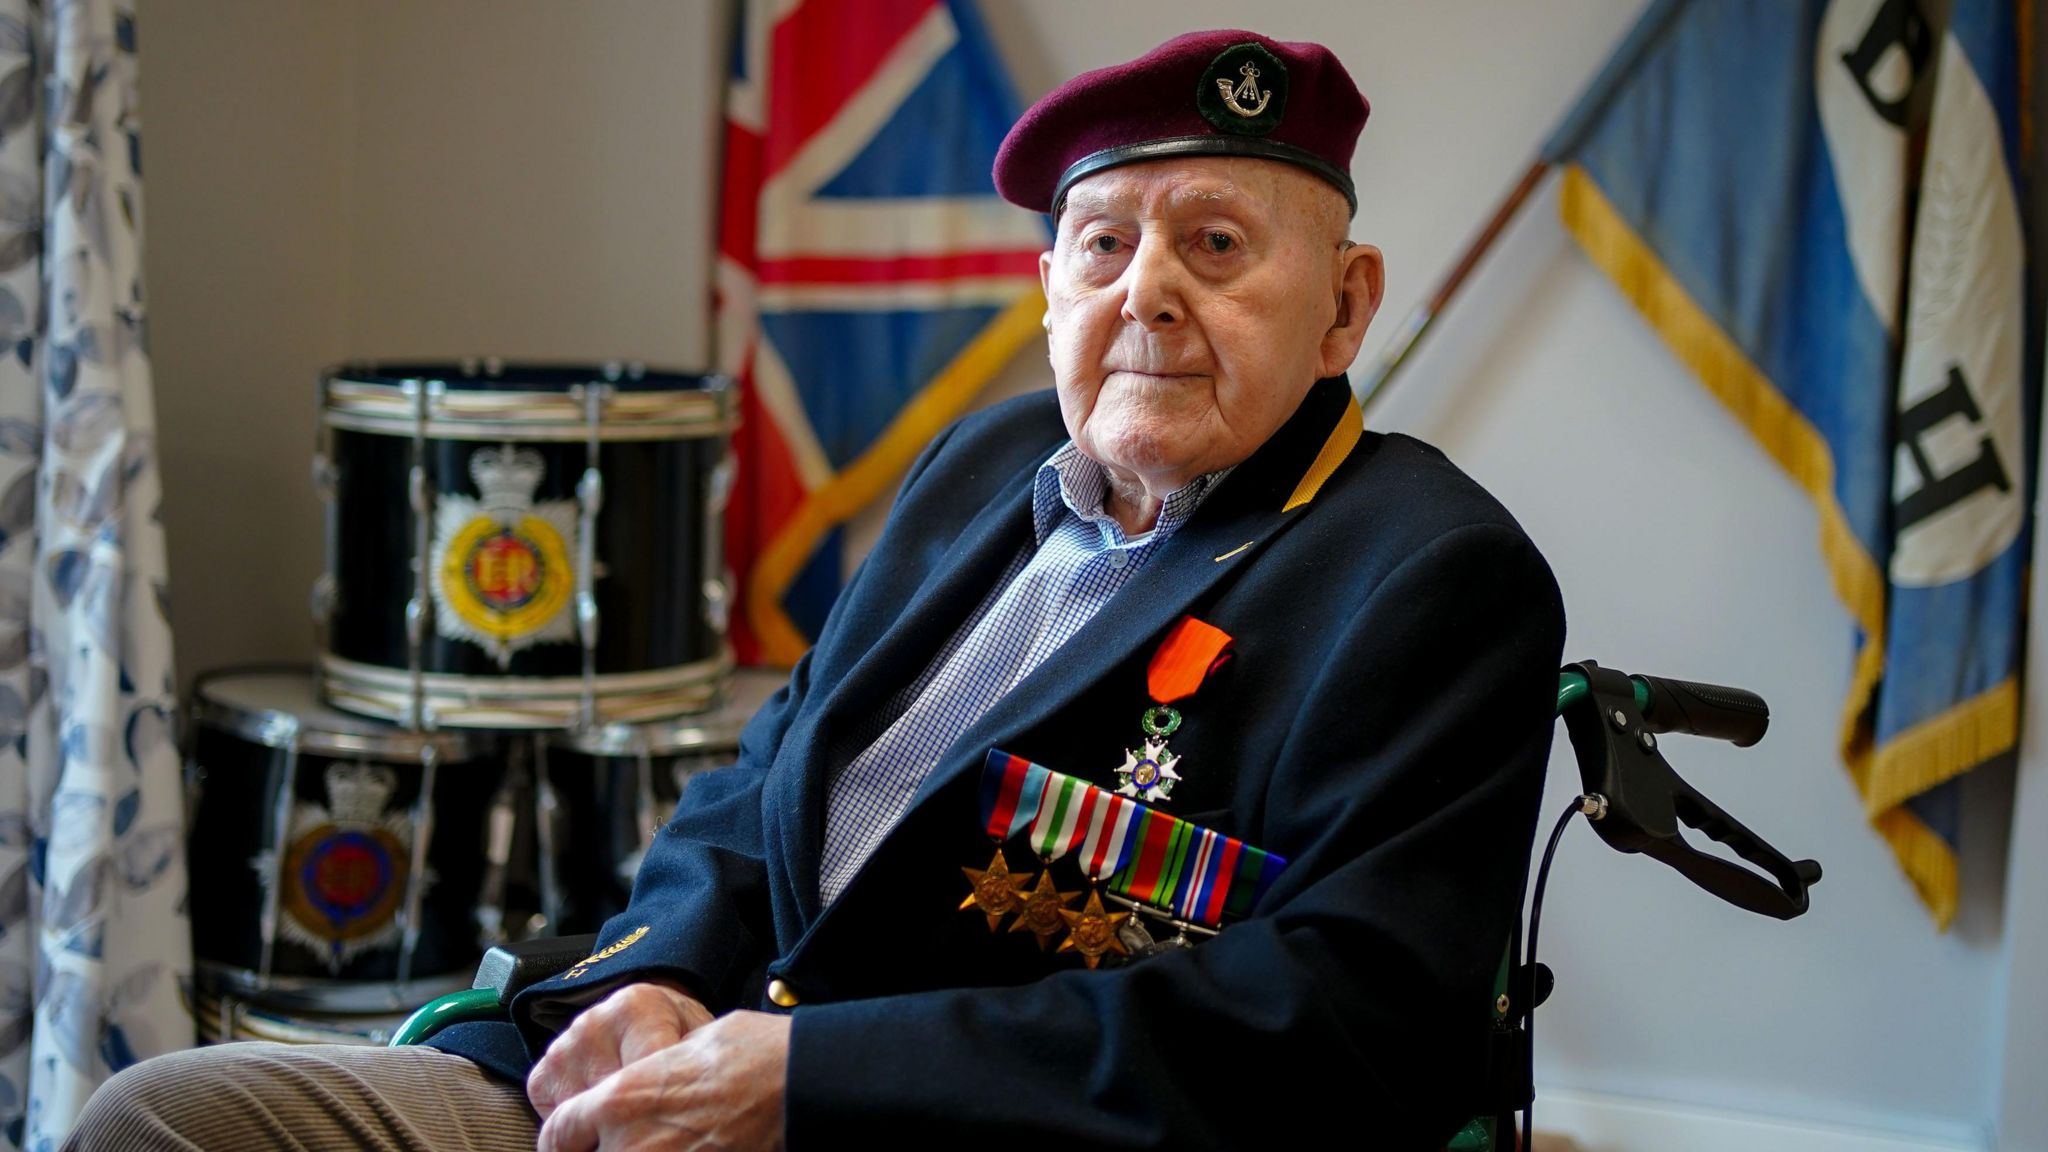 D-Day Veteran Peter Belcher with his medals in front of military flags and drums